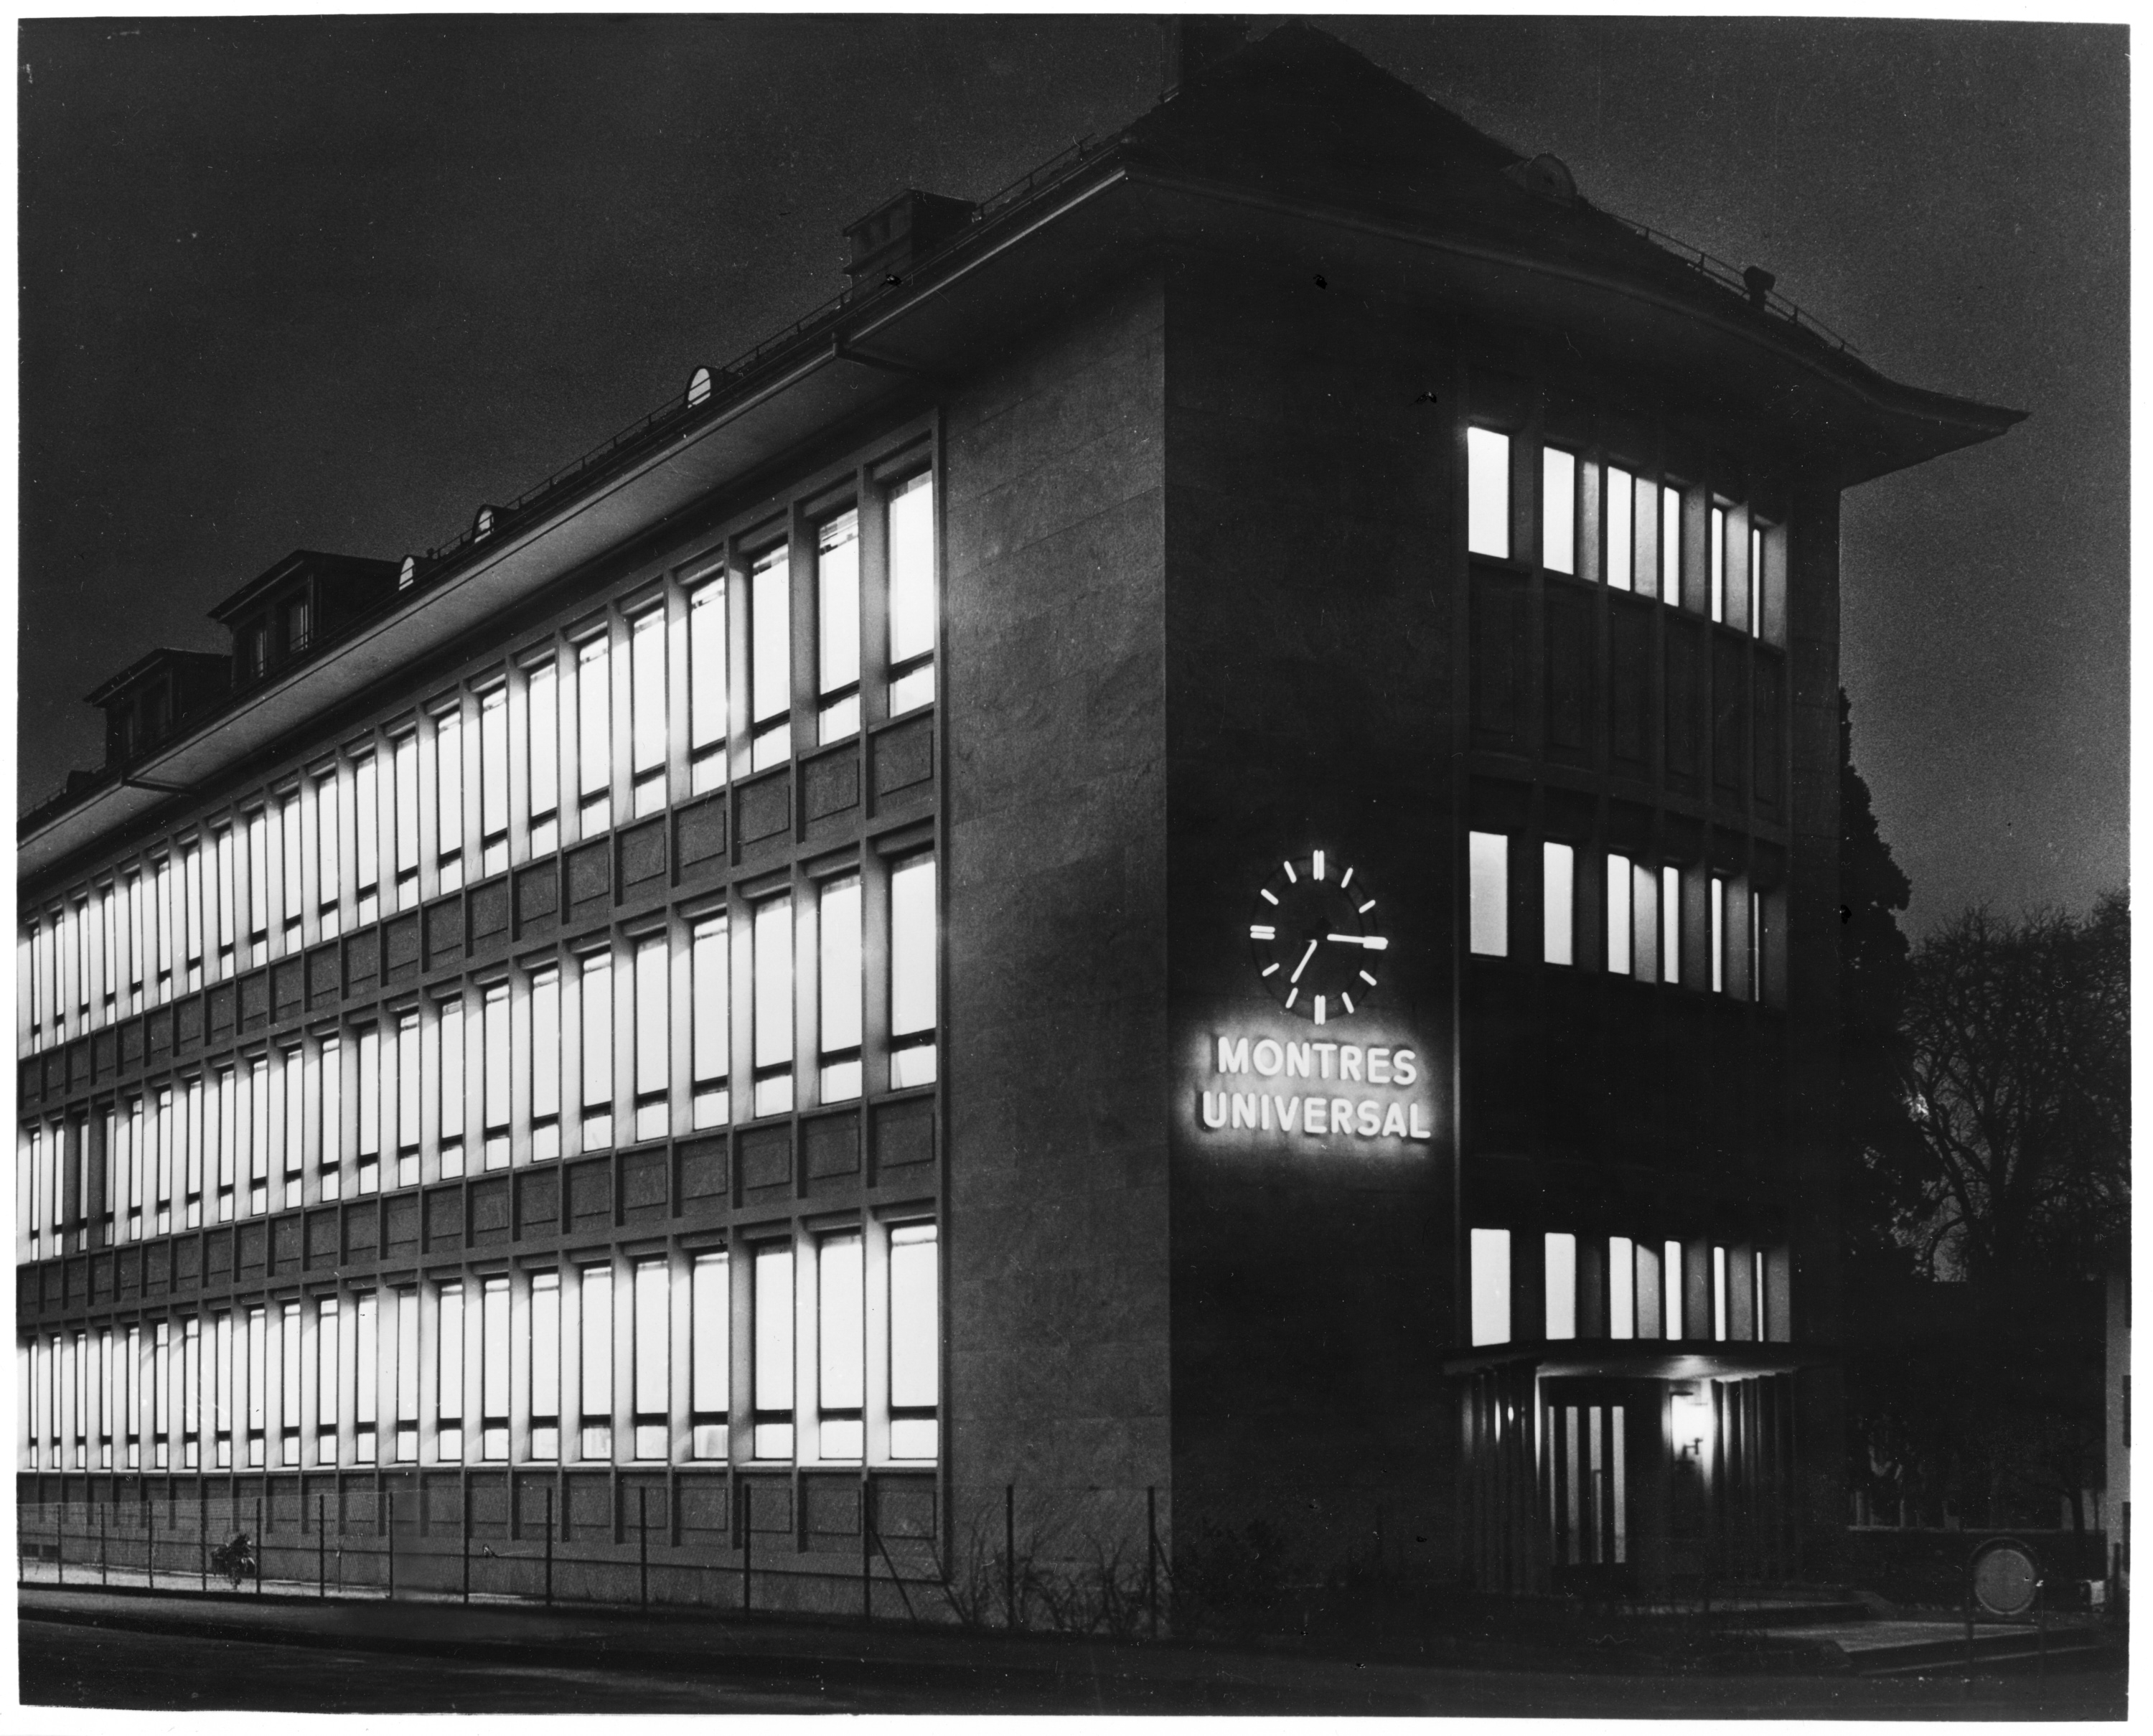 05_Universal_Geneve_the_new_factory_inaugurated_in_1956_Carouge__municipality_in_the_Canton_of_Geneva Breitling adquiere Universal Genève